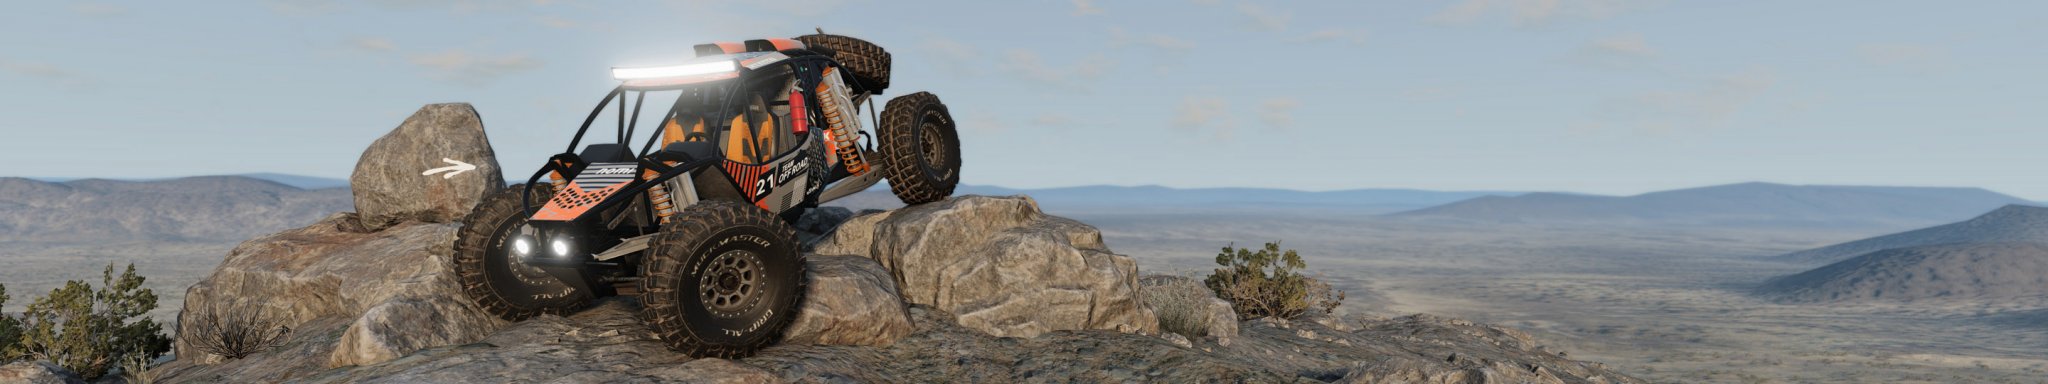 2 BeamNG 3 VEHICLES and ROCK BASHER copy.jpg